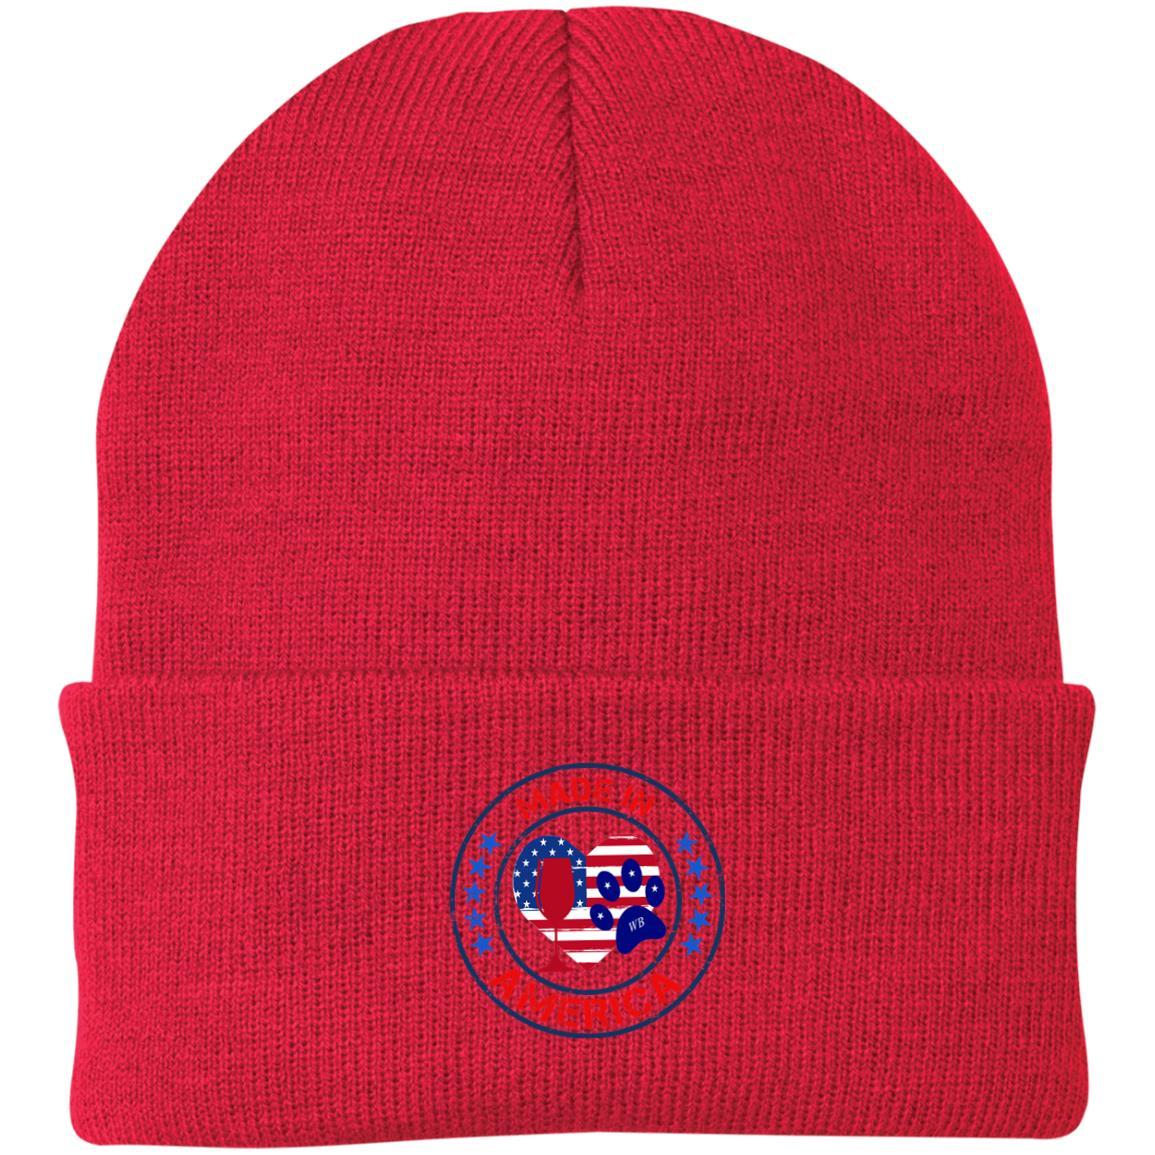 Hats Athletic Red / One Size Winey Bitches Co "Made In America" Embroidered Knit Cap WineyBitchesCo